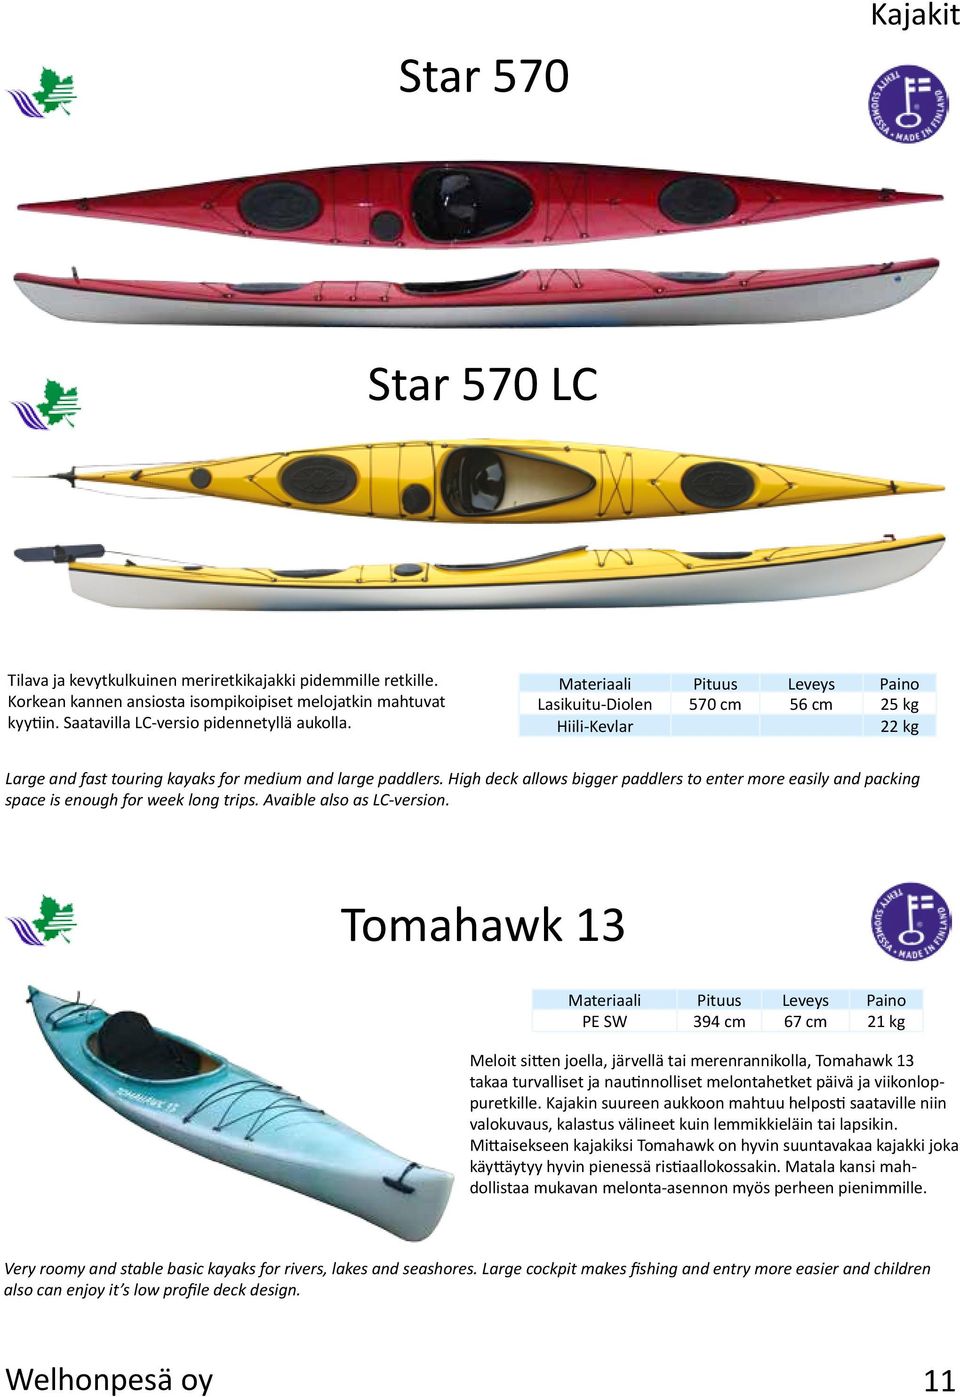 High deck allows bigger paddlers to enter more easily and packing space is enough for week long trips. Avaible also as LC-version.